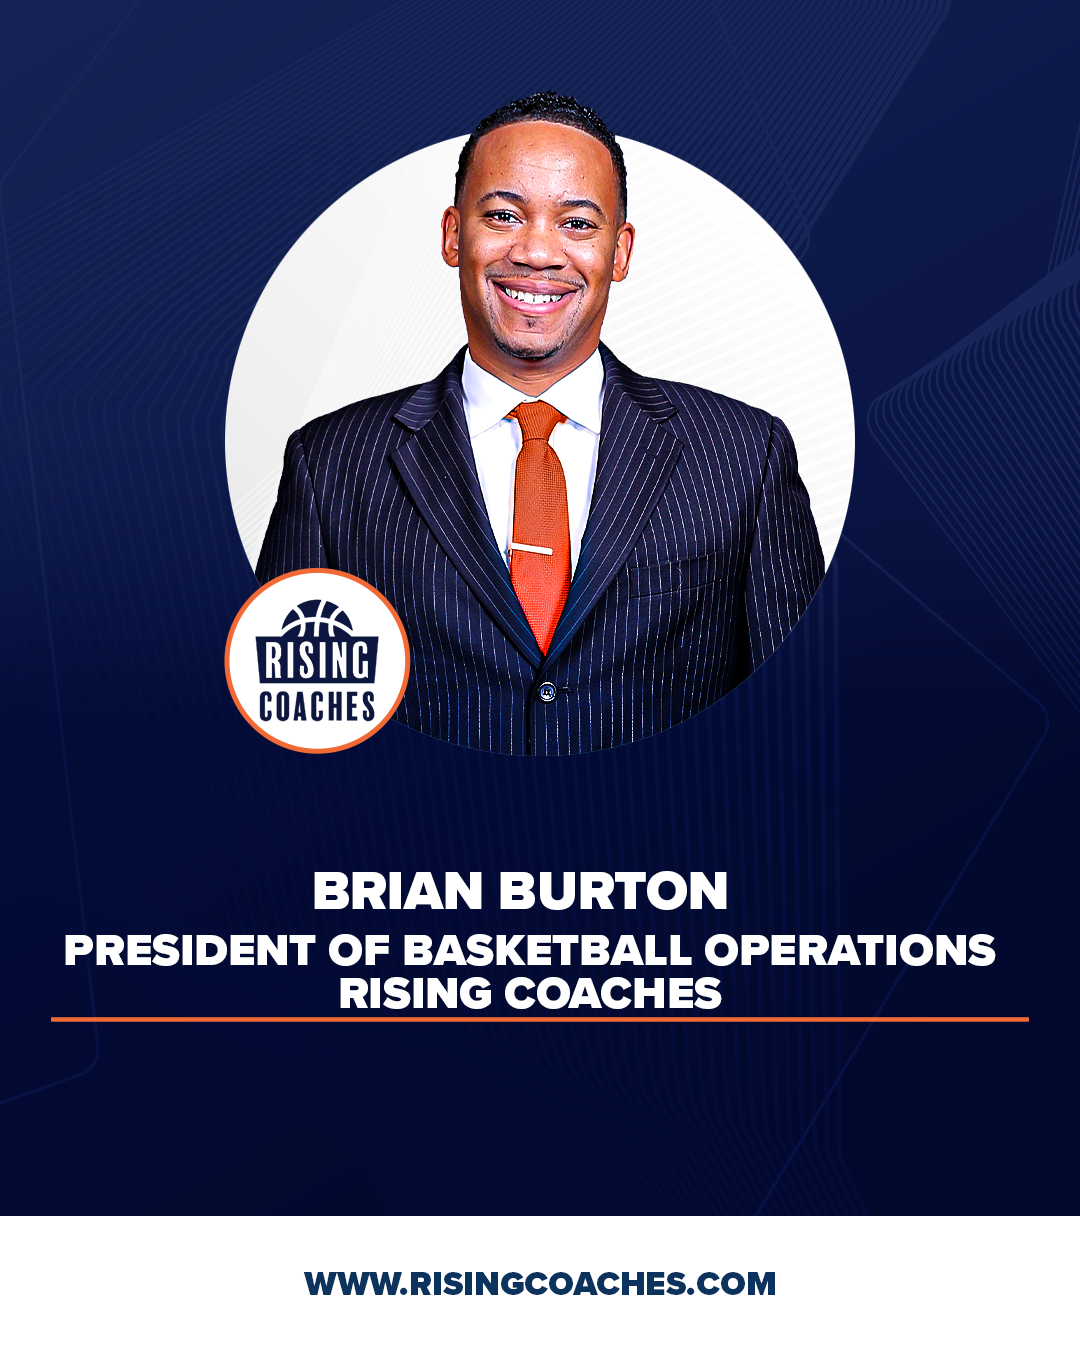 Brian Burton Named Rising Coaches President of Basketball Operations